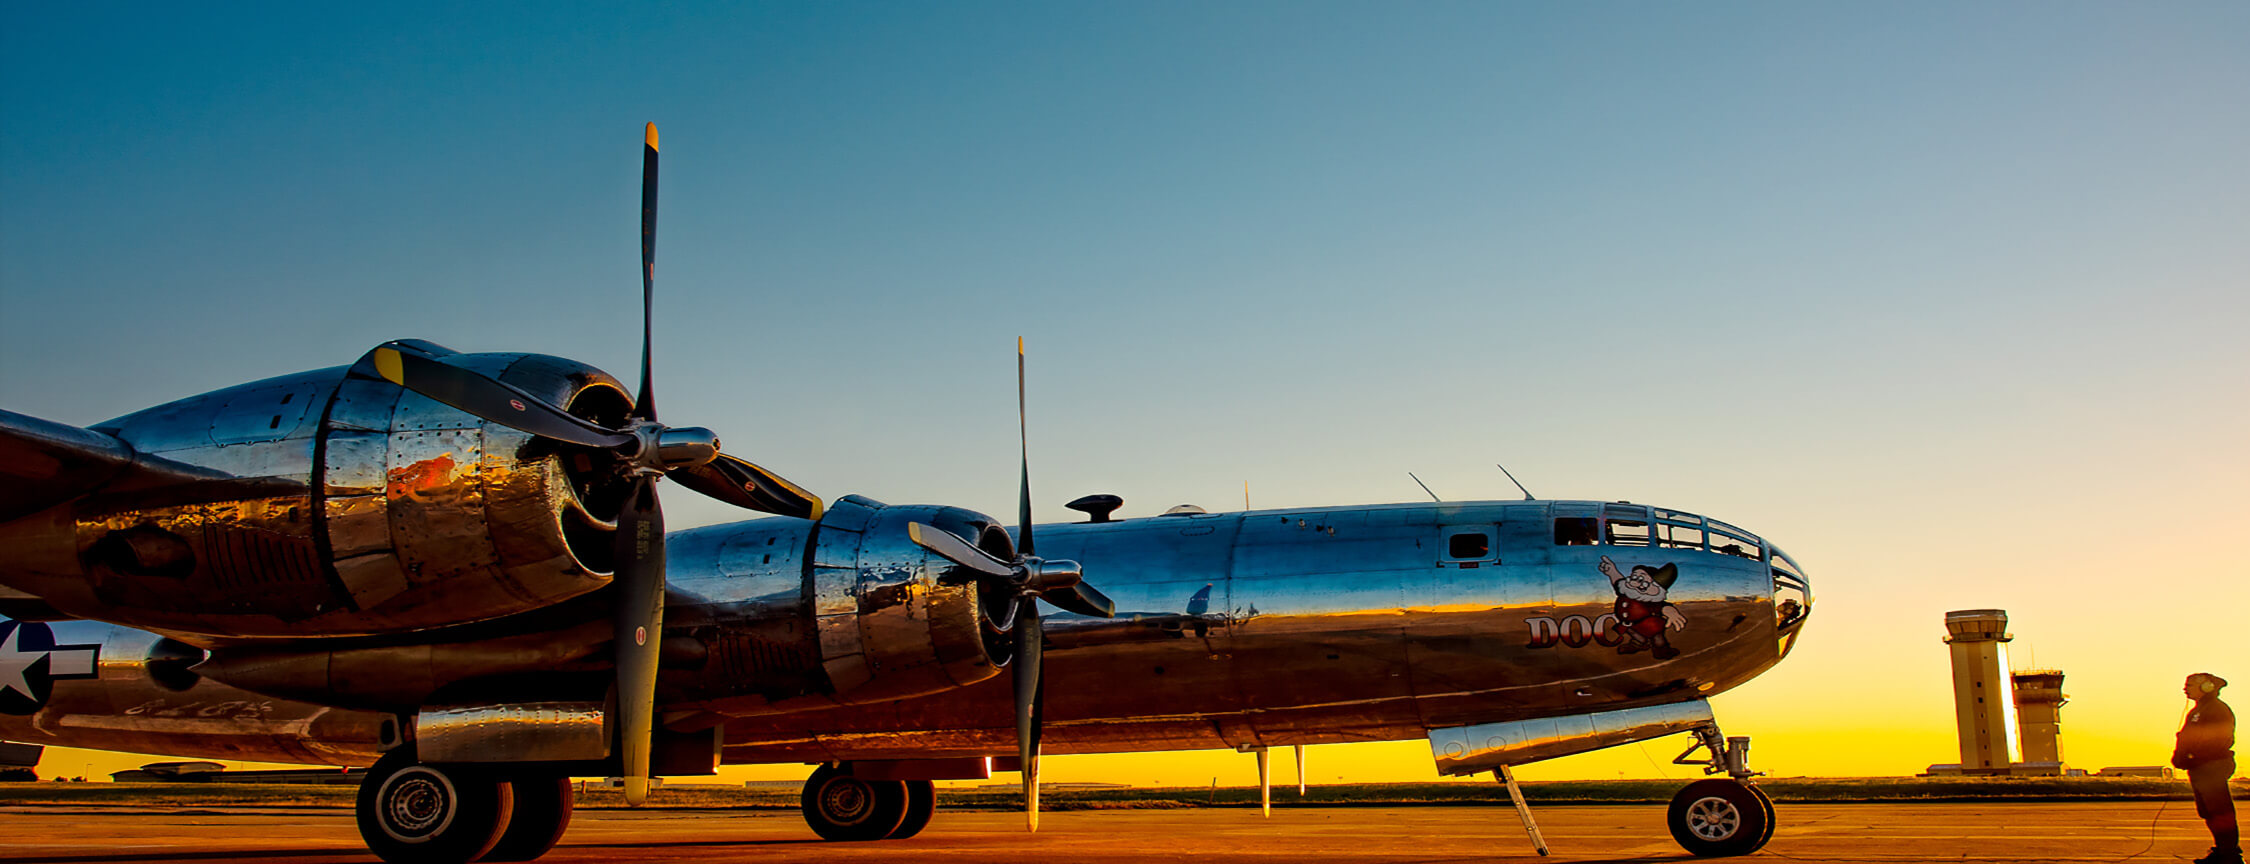 Take a thrilling ride in a vintage B-29 bomber plane this April in